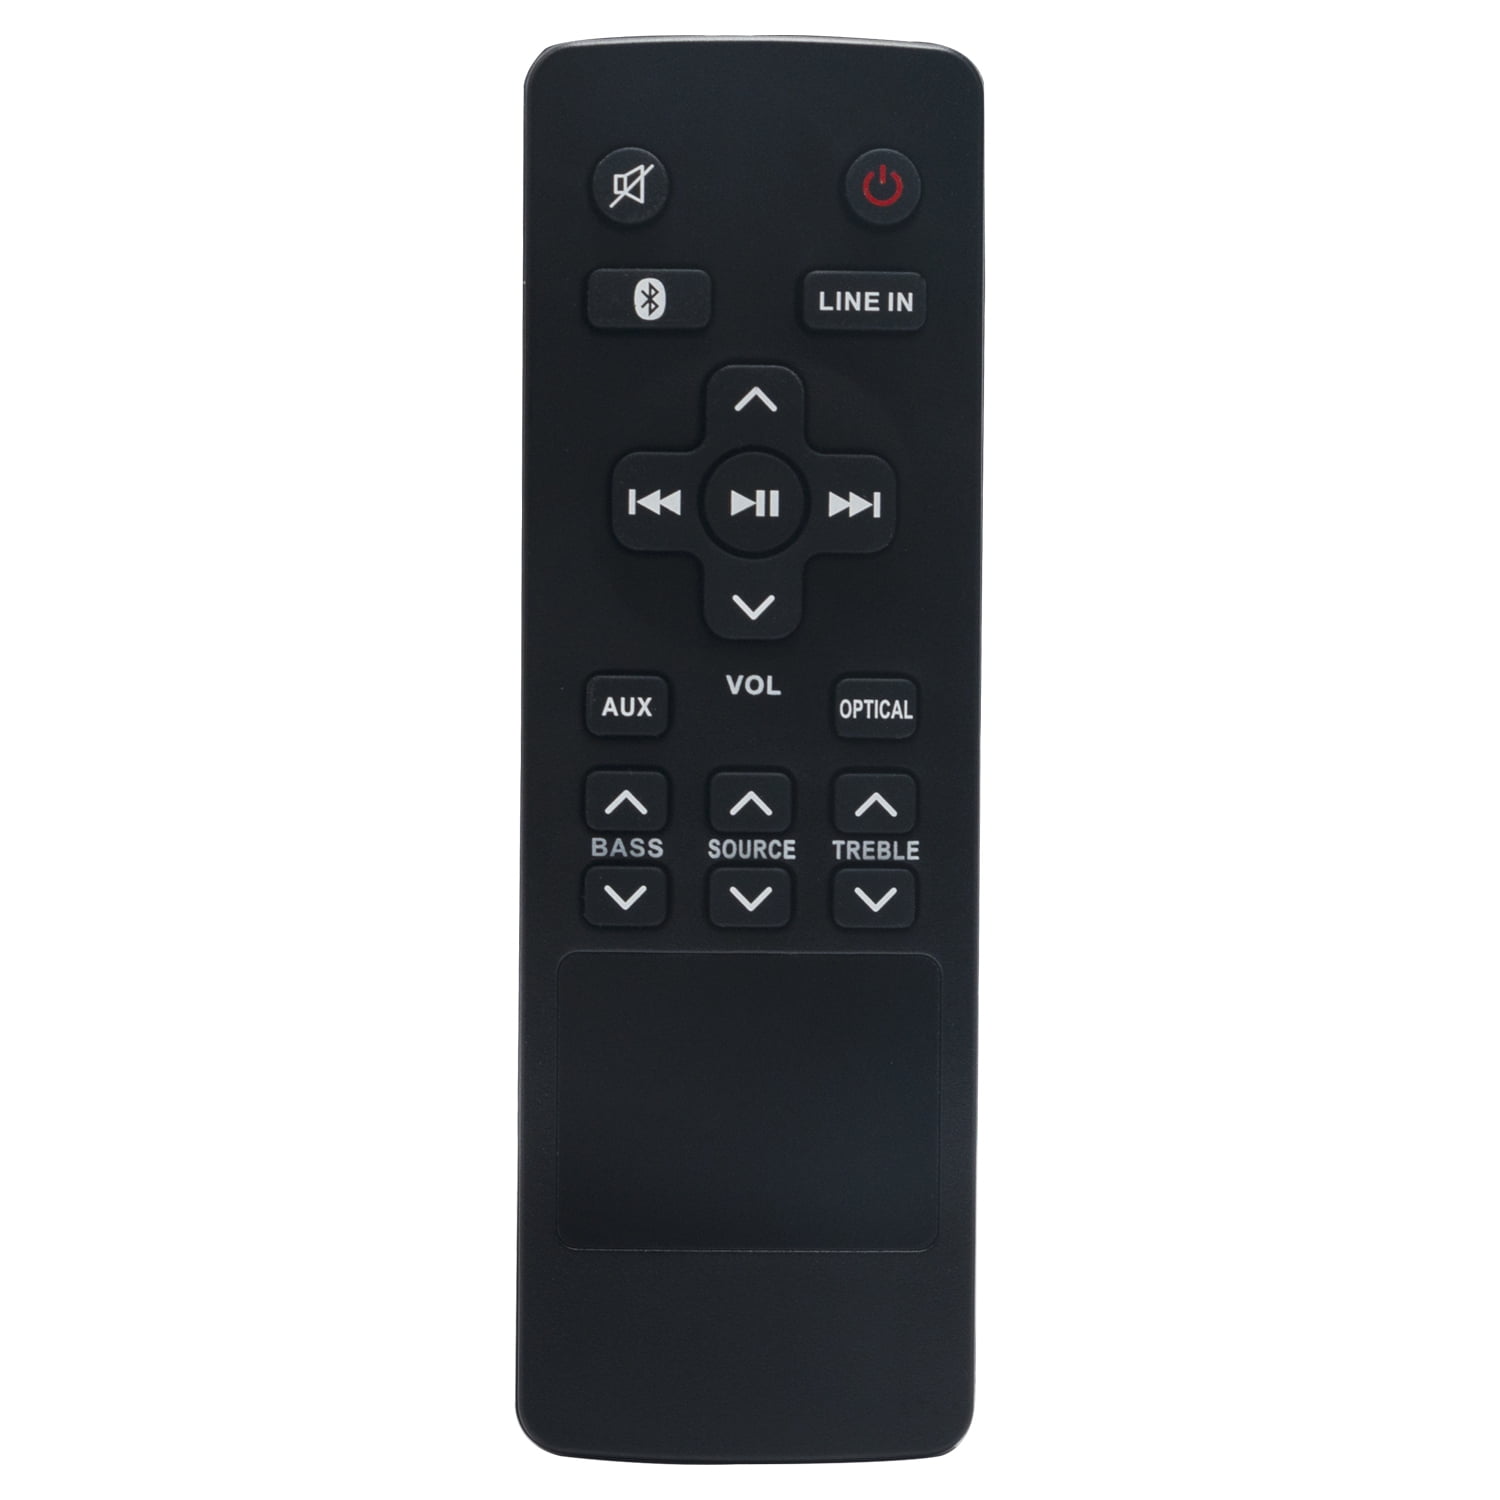 VINABTY New RTS7010B Replaced Remote fit for RCA RTS7010B-E1 RTS7010BE1 RTS71... 